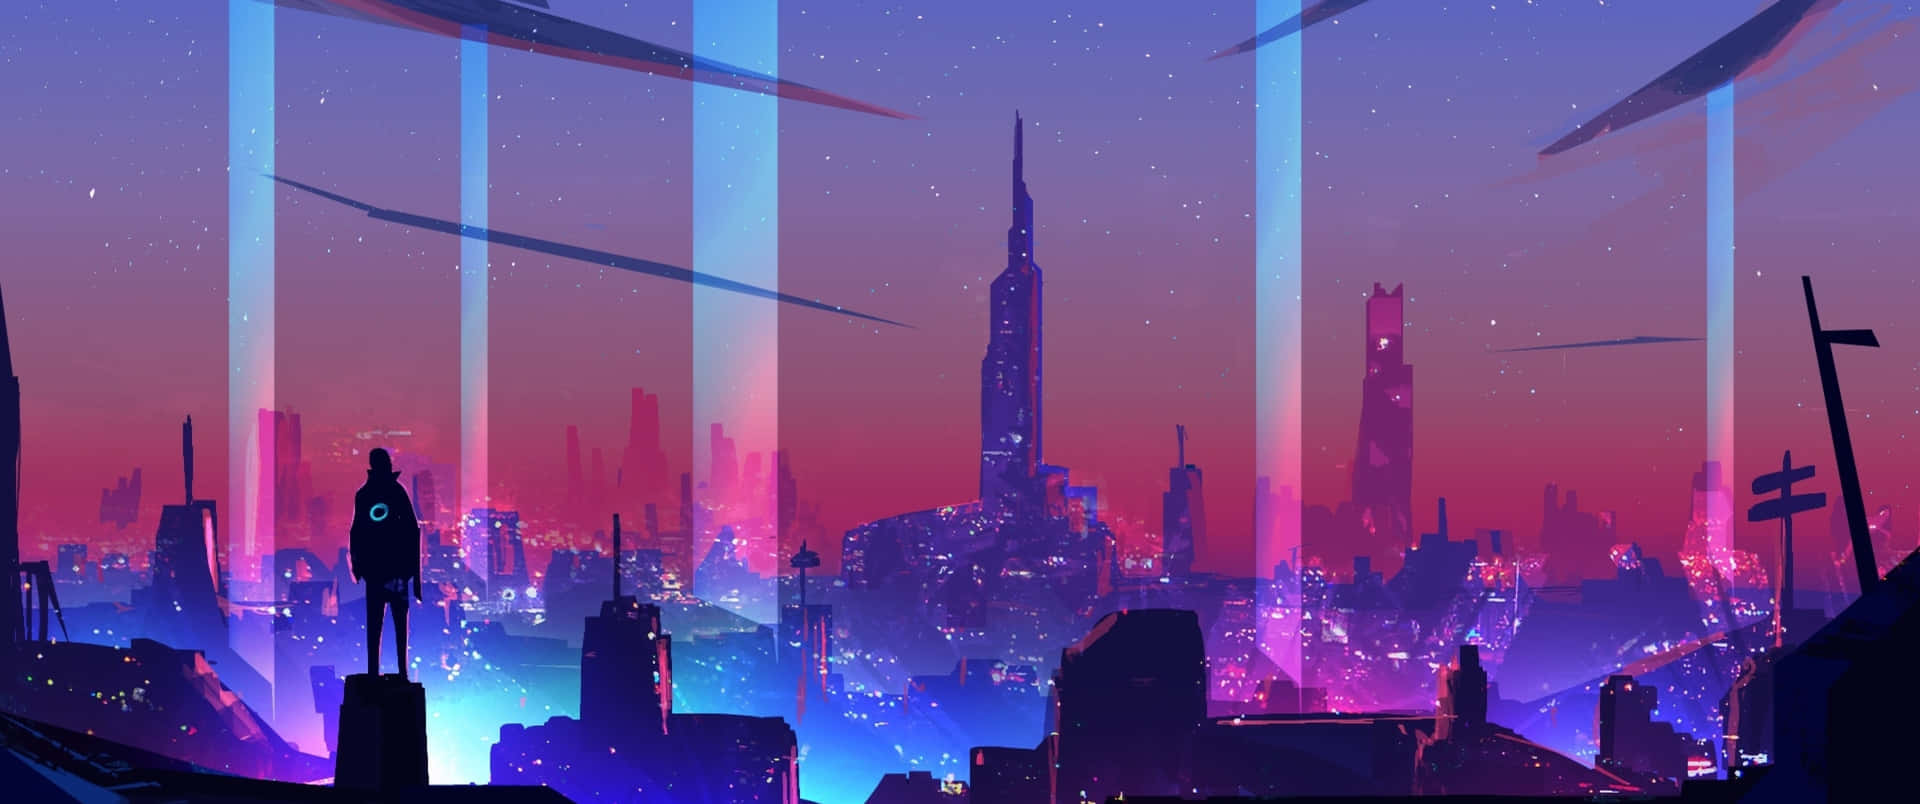 A Futuristic City With A Blue Sky And Colorful Buildings Wallpaper